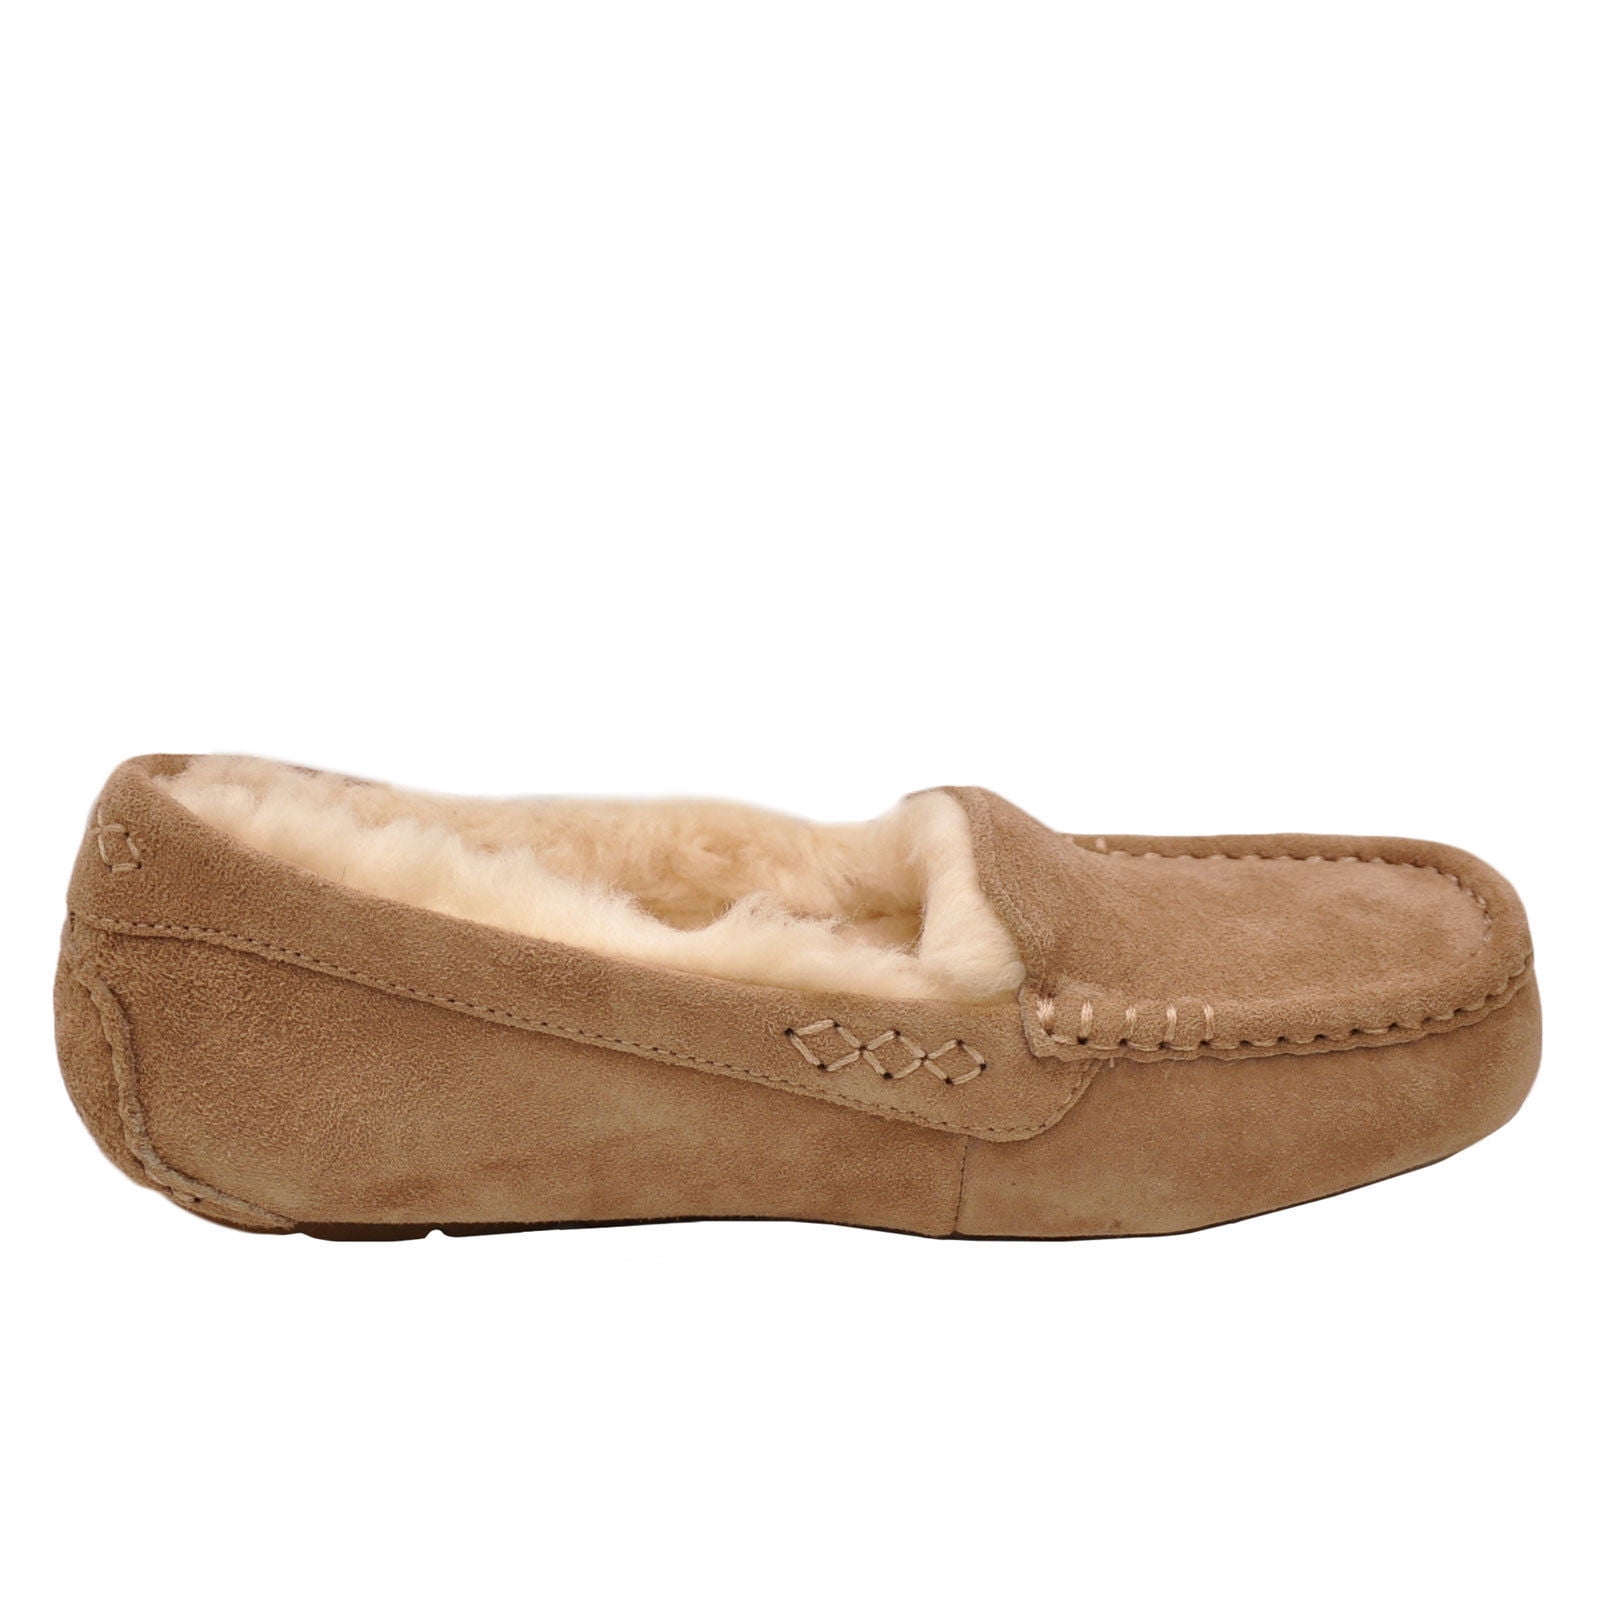 ugg ansley slippers fawn